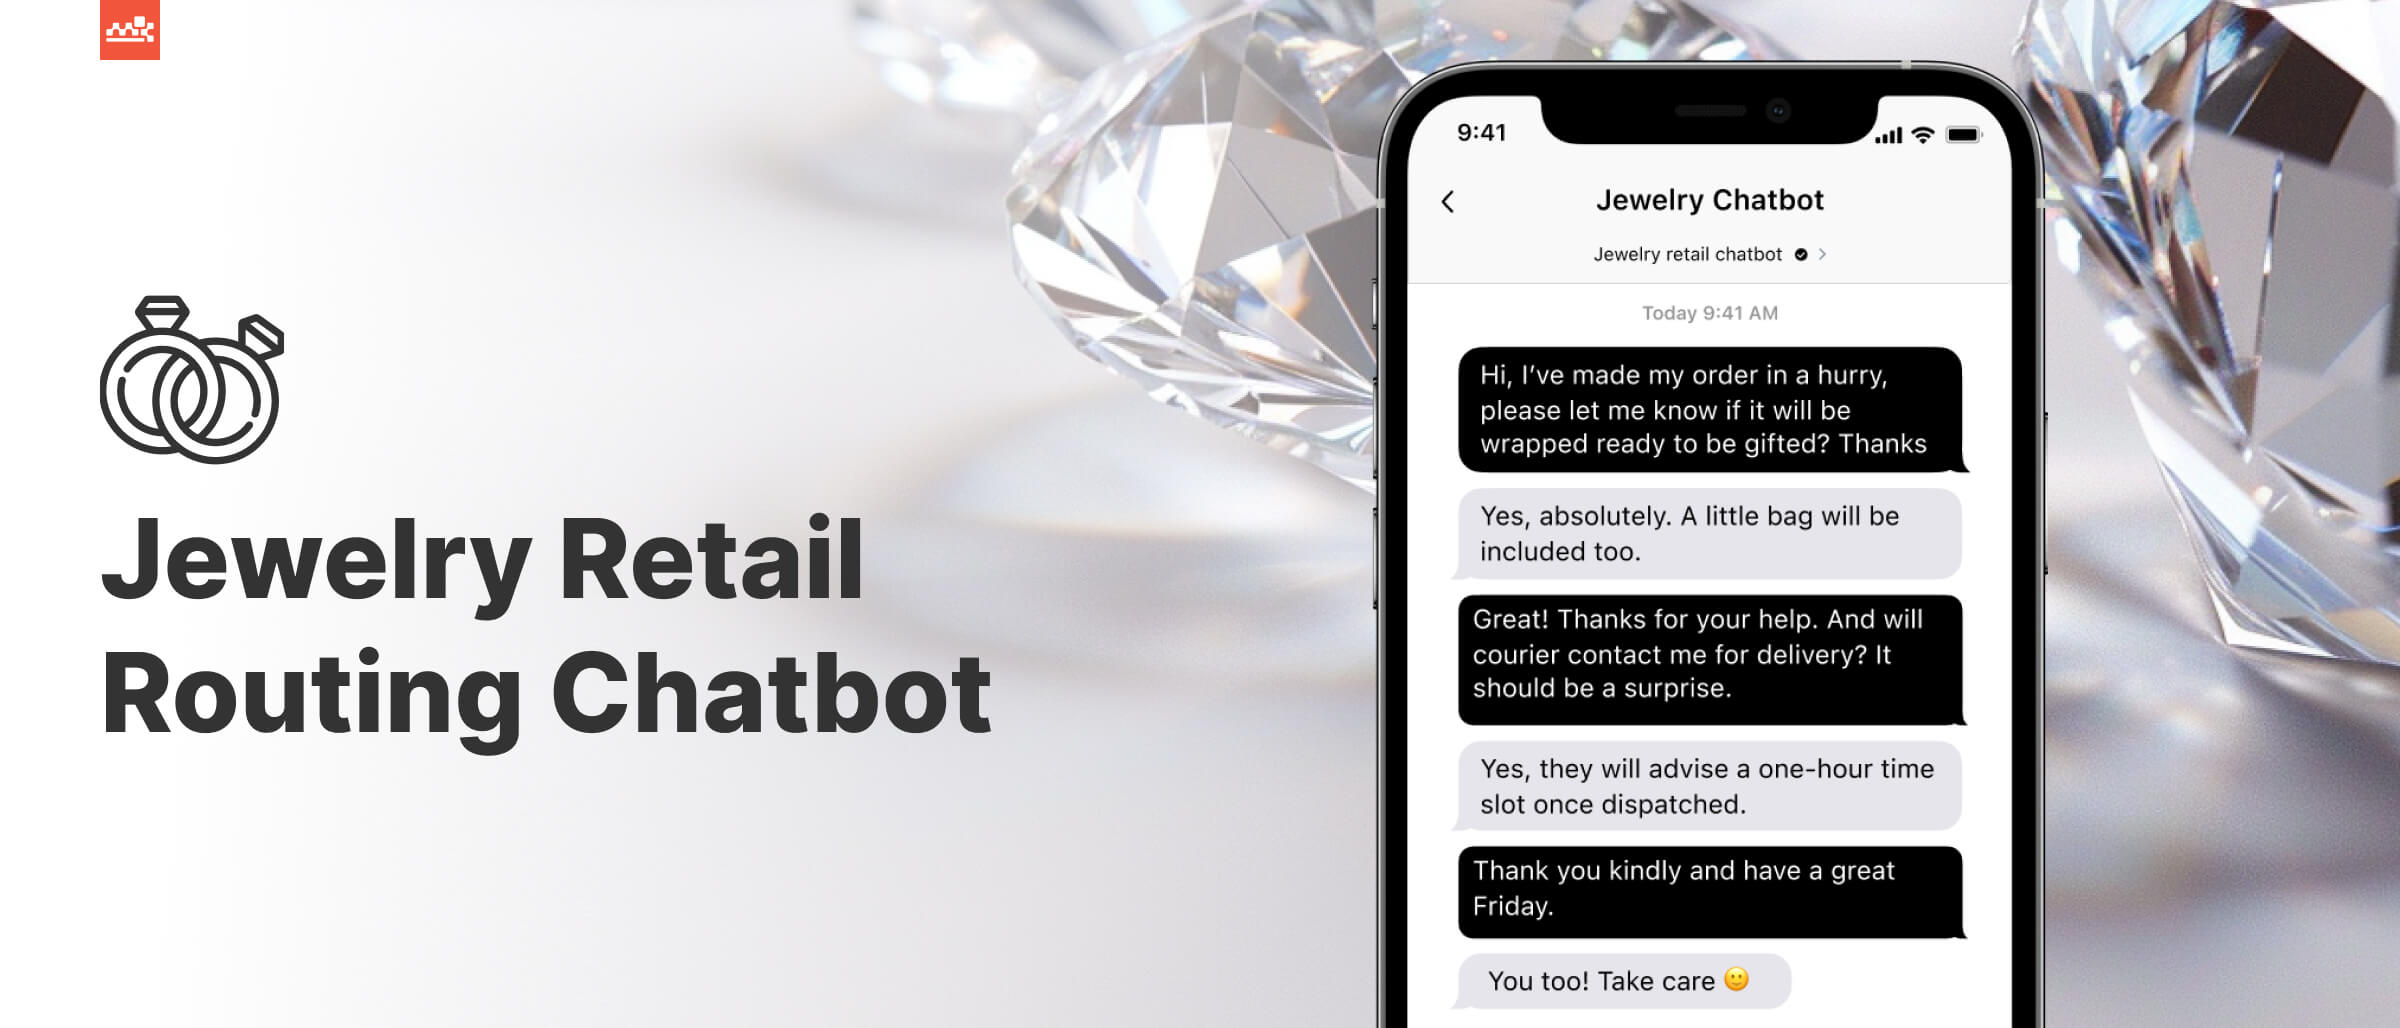 Jewelry Retail Routing Chatbot